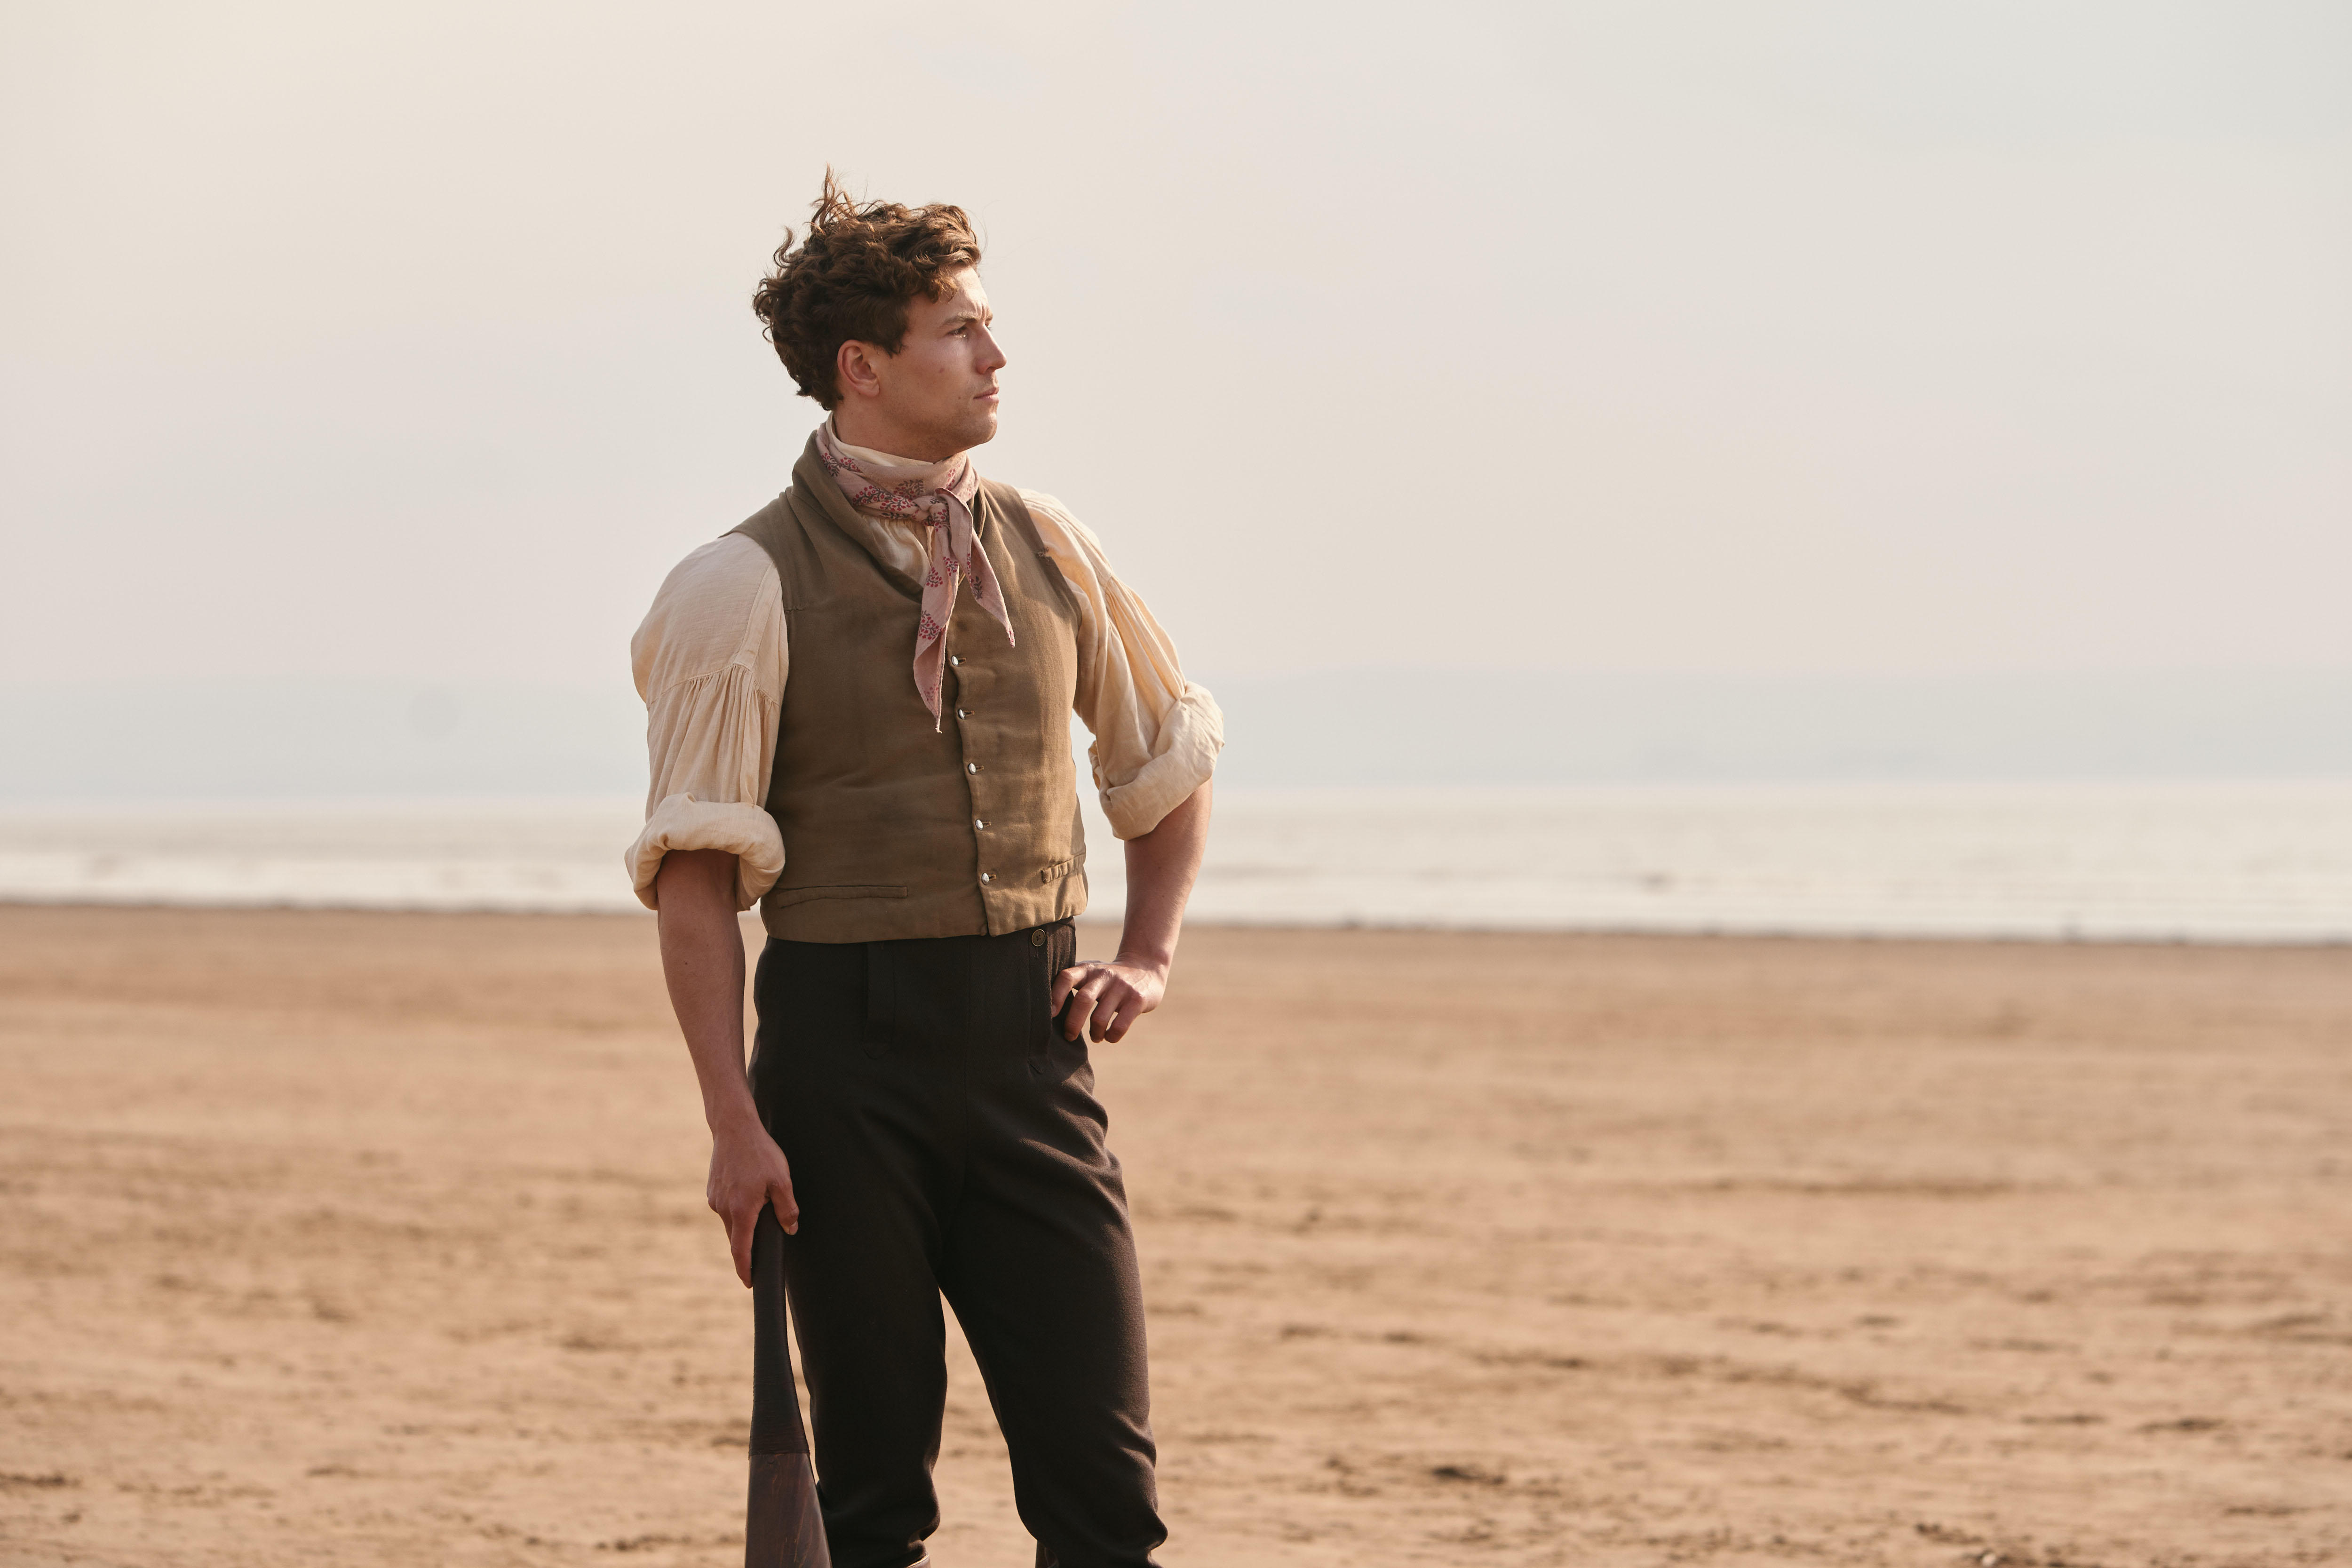 Leo Suter as Young Stringer standing on a beach in 'Sanditon'